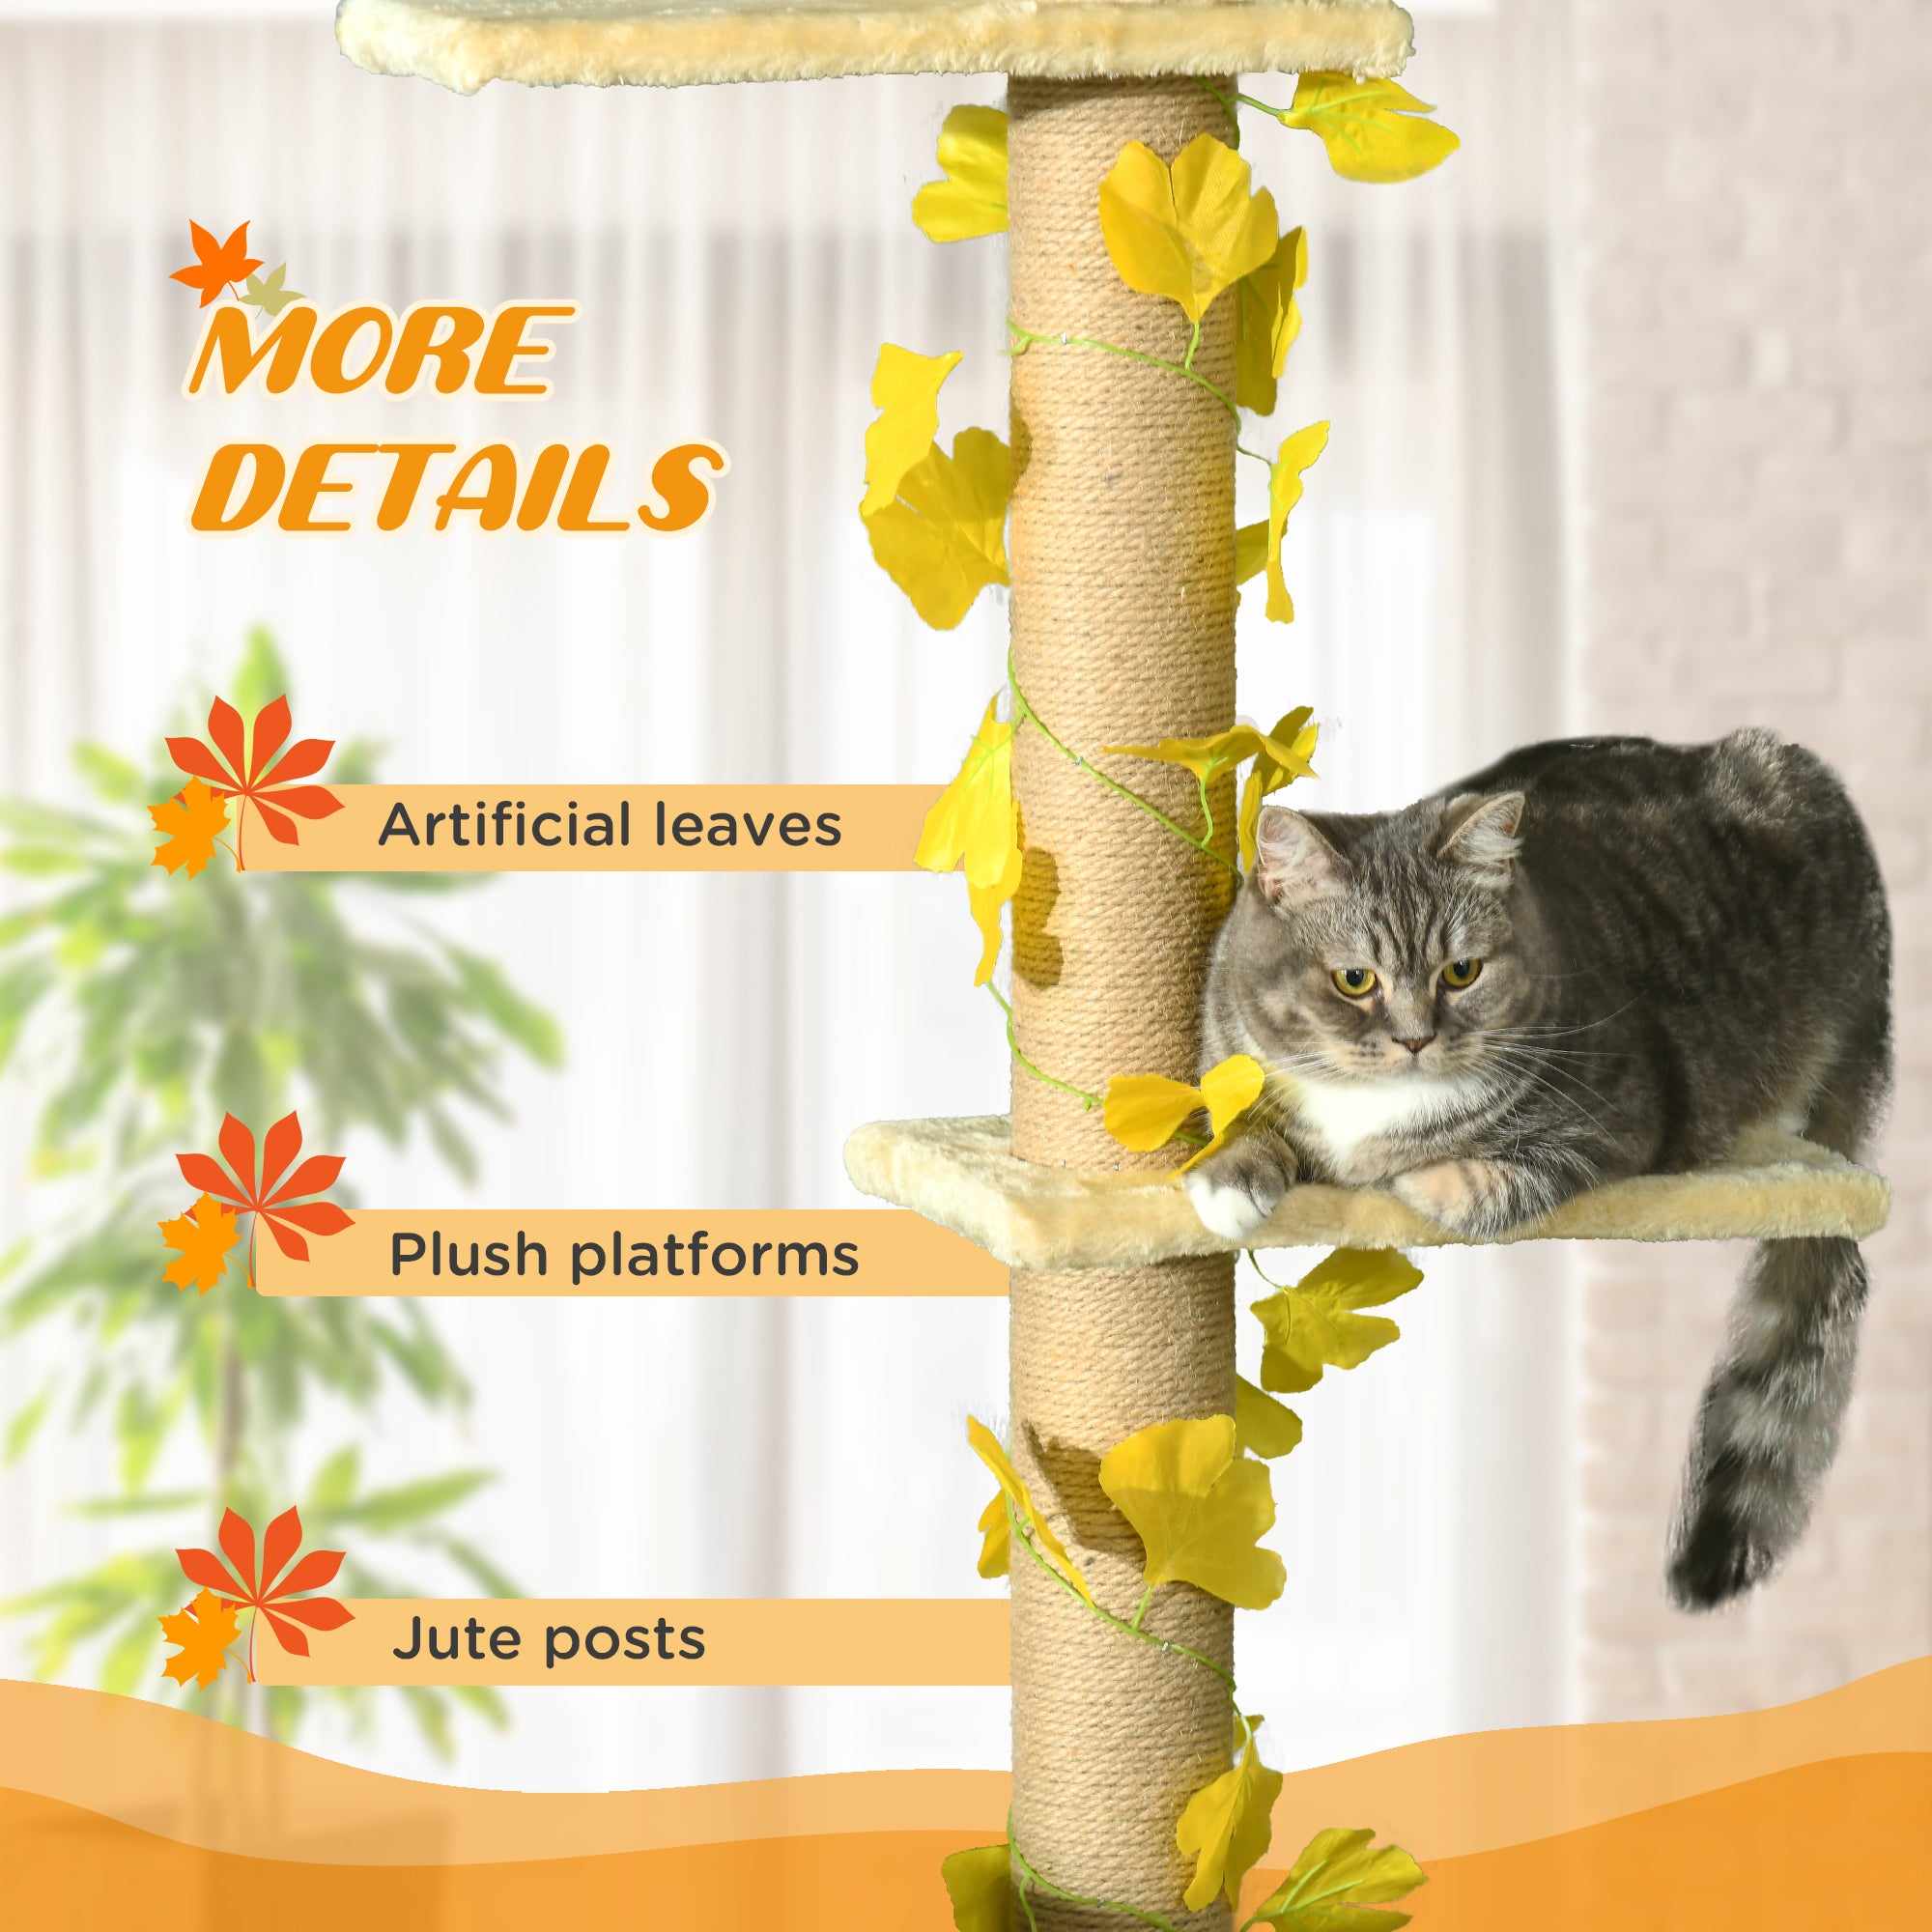 PawHut 202-242cm Height Adjustable Floor to Ceiling Cat Tree for Indoor Cats with Sisal Scratching Post, 3- Tier Cat Tower Climbing Activity Centre with Platforms, Leaves, Yellow